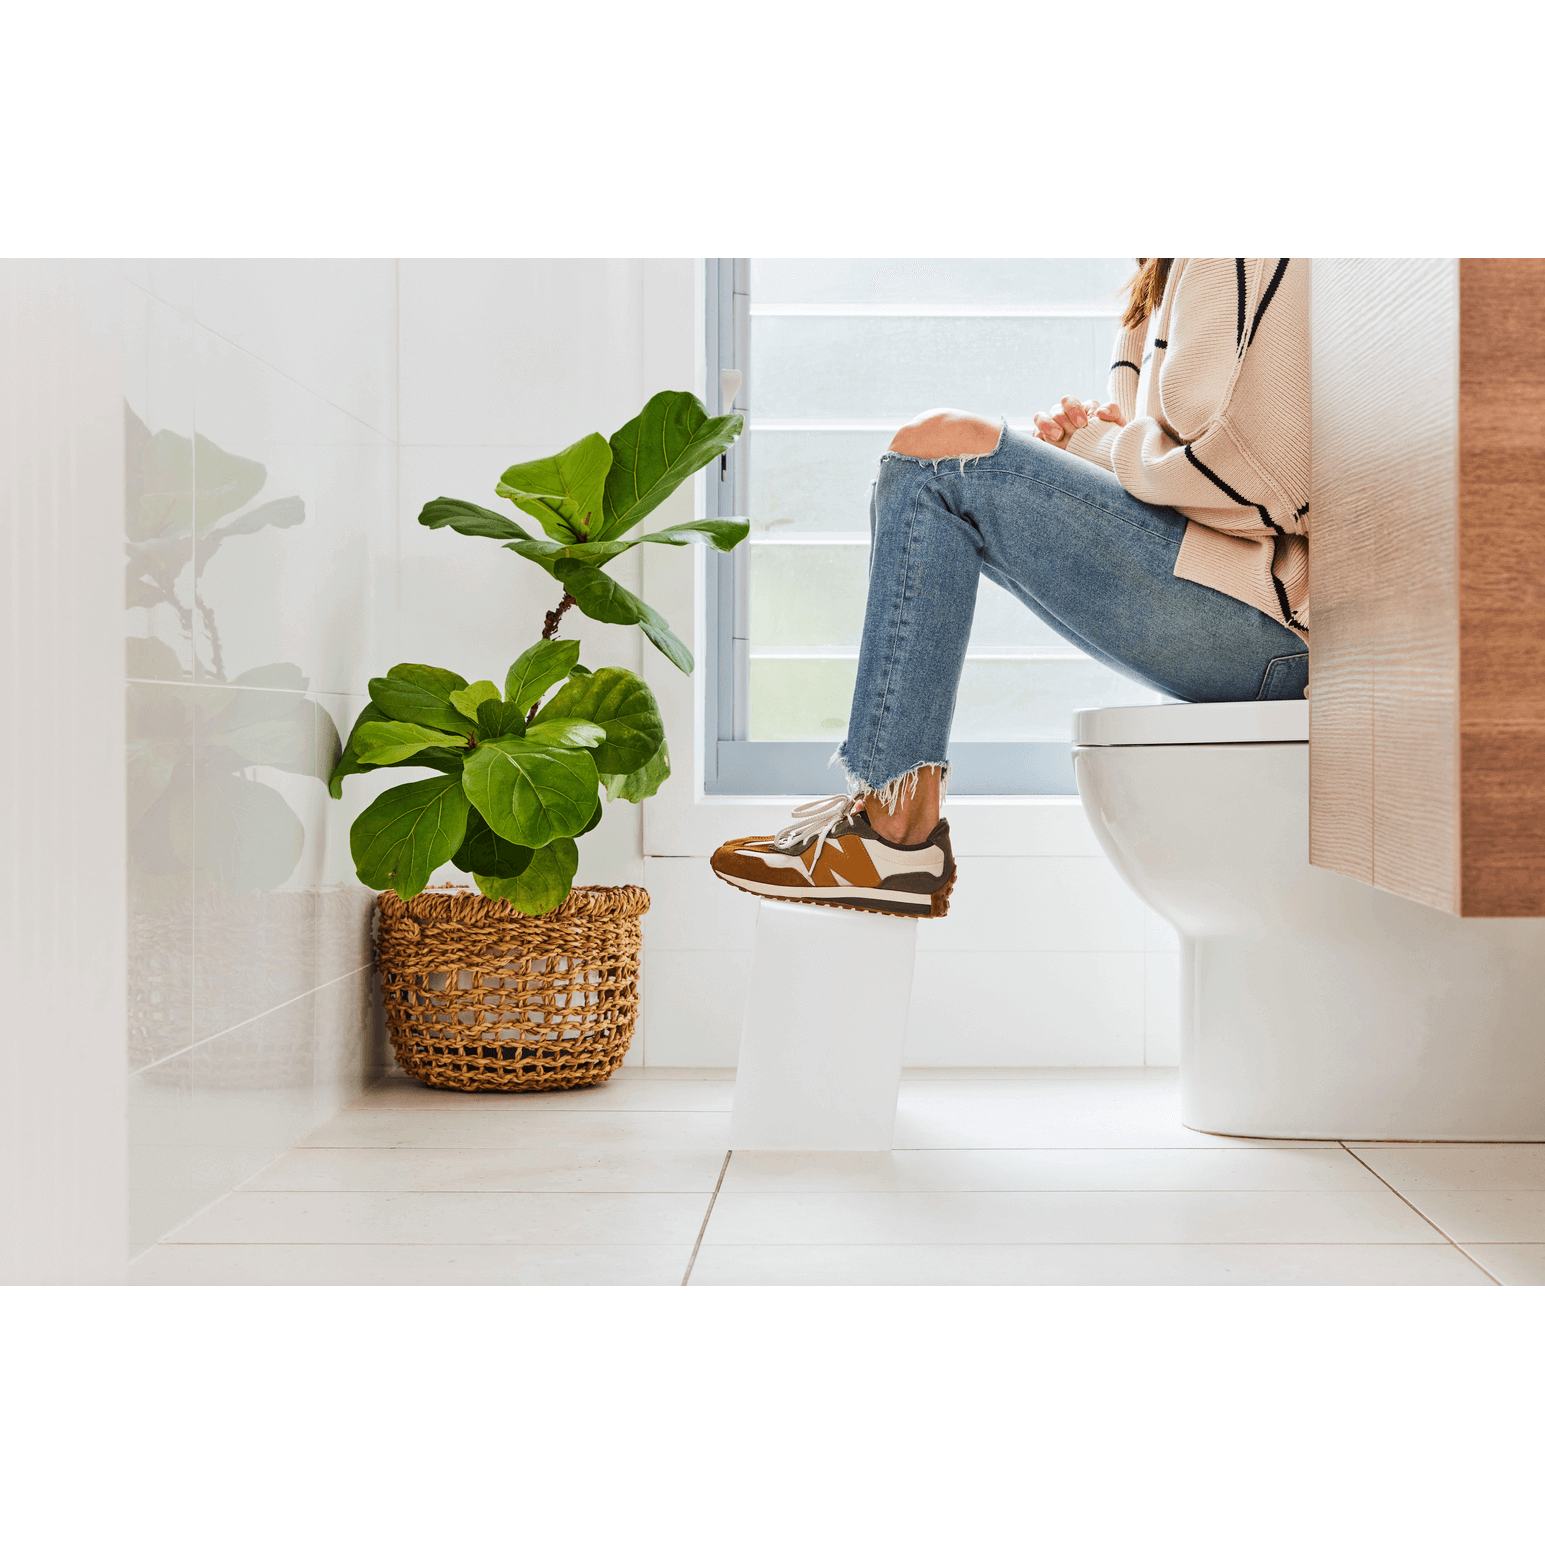 The PROPPR Acer - Nordic Toilet Foot Stool - side view in a bathroom with feet up on stool